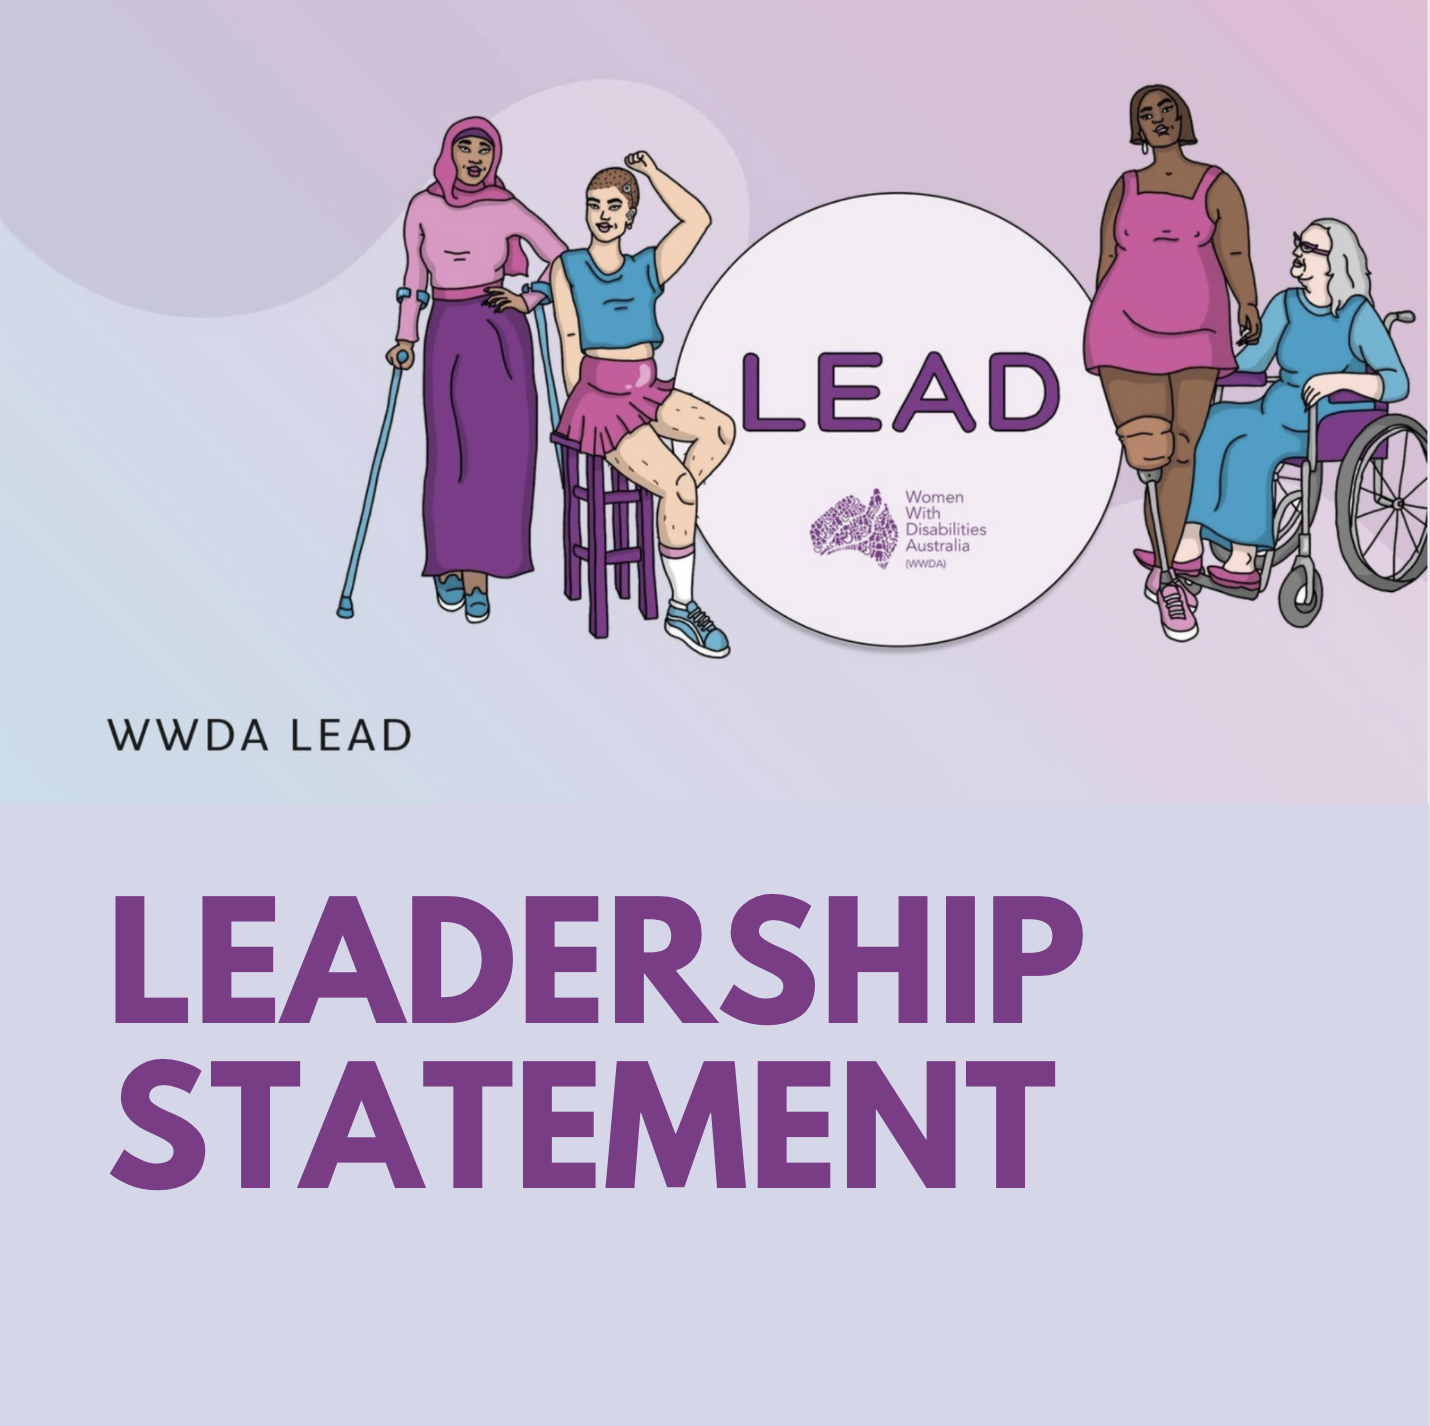 Background with pastel blue, purple and pinks. In the top left is the WWDA LEAD Project Logo: which is pale purple circle with text "LEAD" and the WWDA logo. Around the logo are two women representing diversity and different disabilities in colourful clothes. Main text reads: ‘WWDA LEAD. Leadership Statement